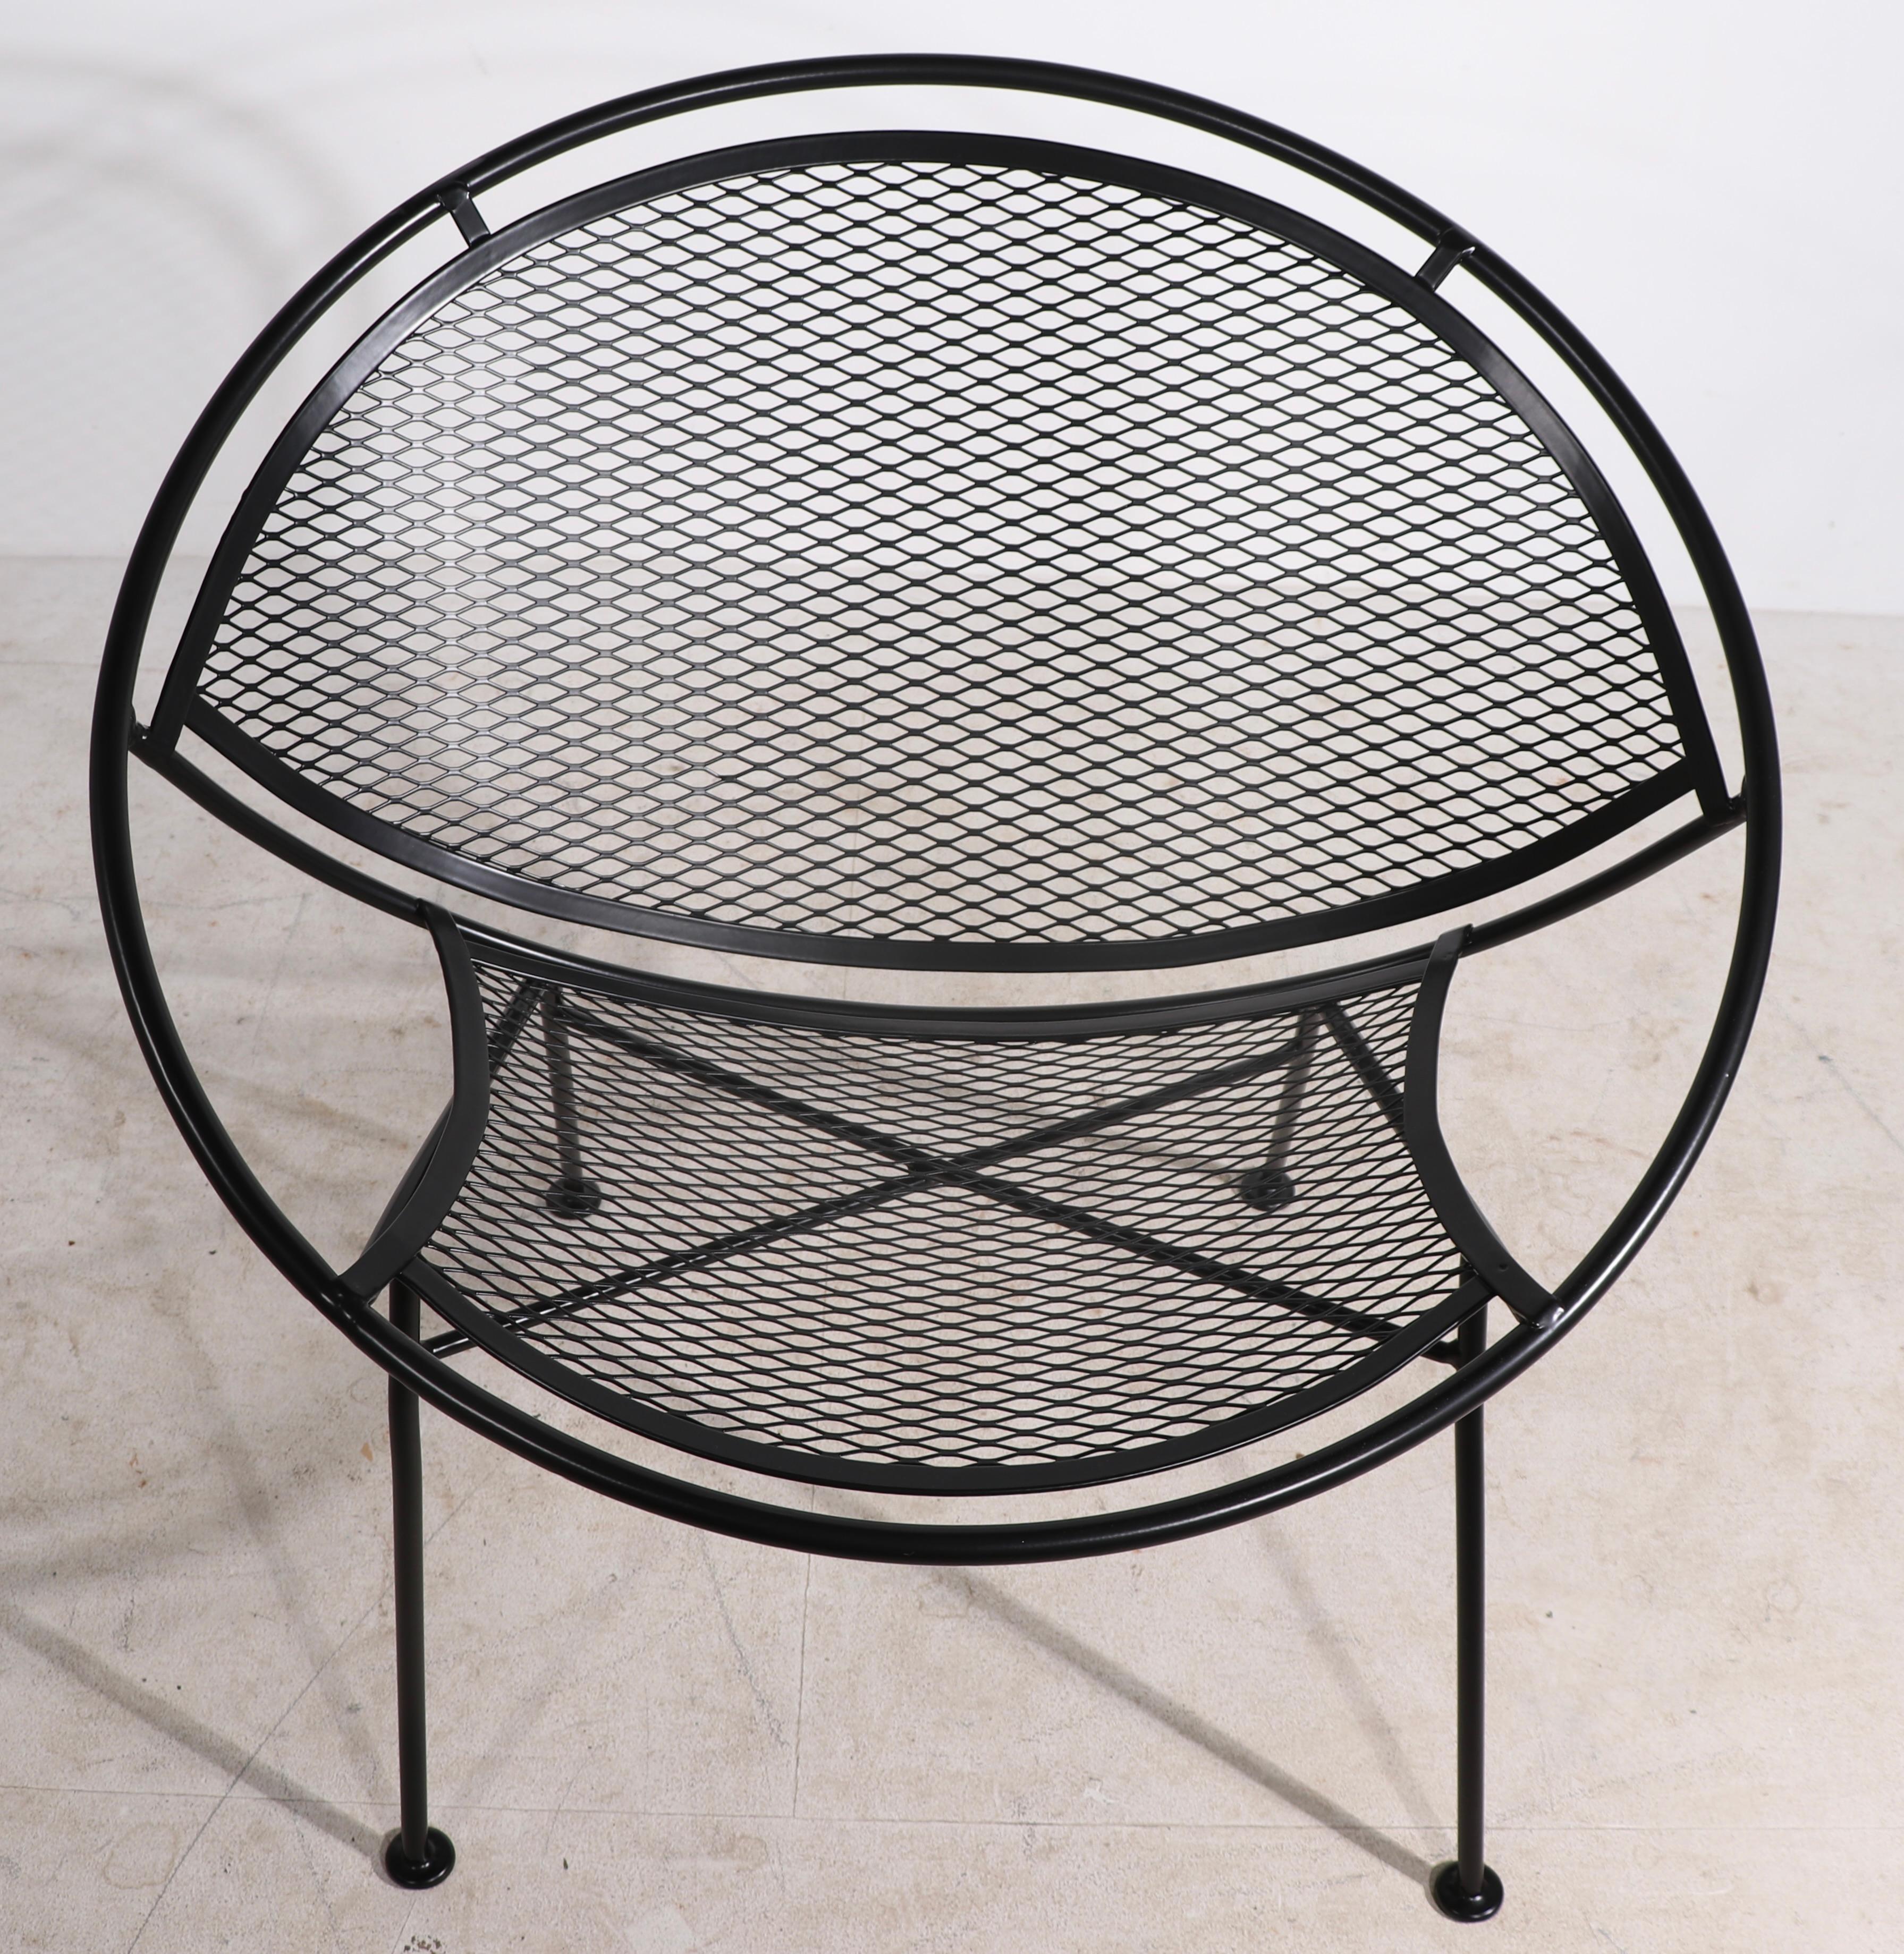 Chic garden, patio, poolside chair from the desirable Radar series, by Salterini. This example is newly powder coated in voguish black satin finish. Clean, ready to use condition.